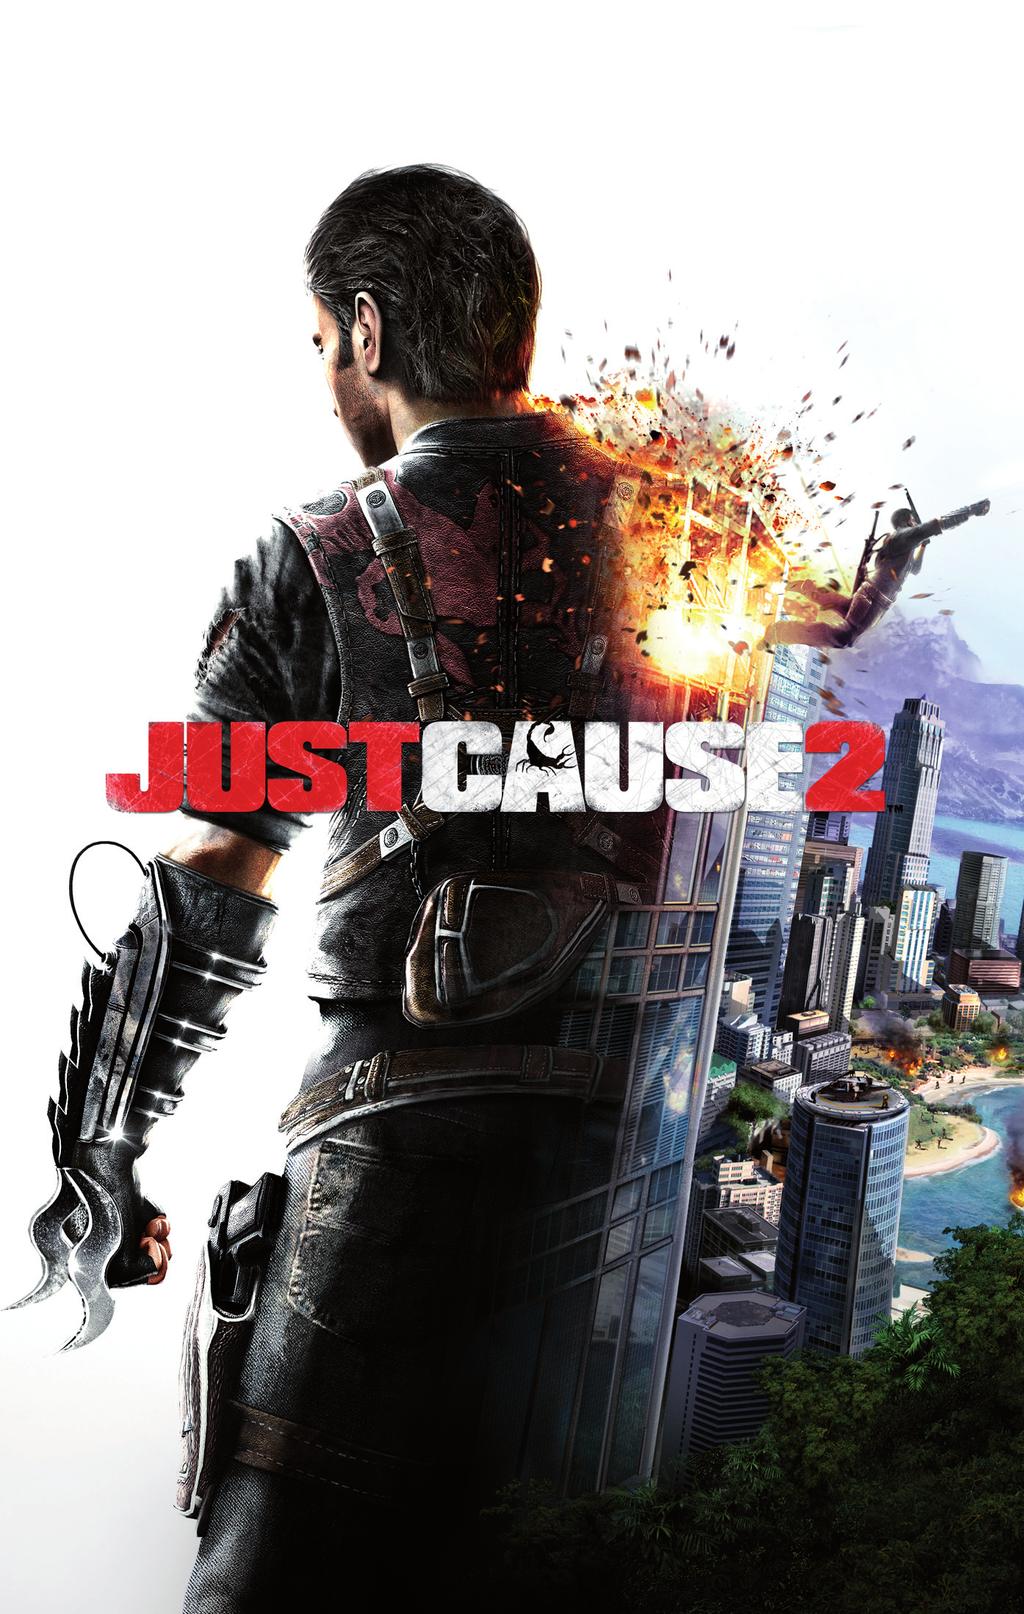 ENGLISH 5021290038349 www.justcause.com Just Cause 2 2010 Square Enix Ltd. Published by Square Enix Ltd. 2010. Developed by Avalanche Studios.